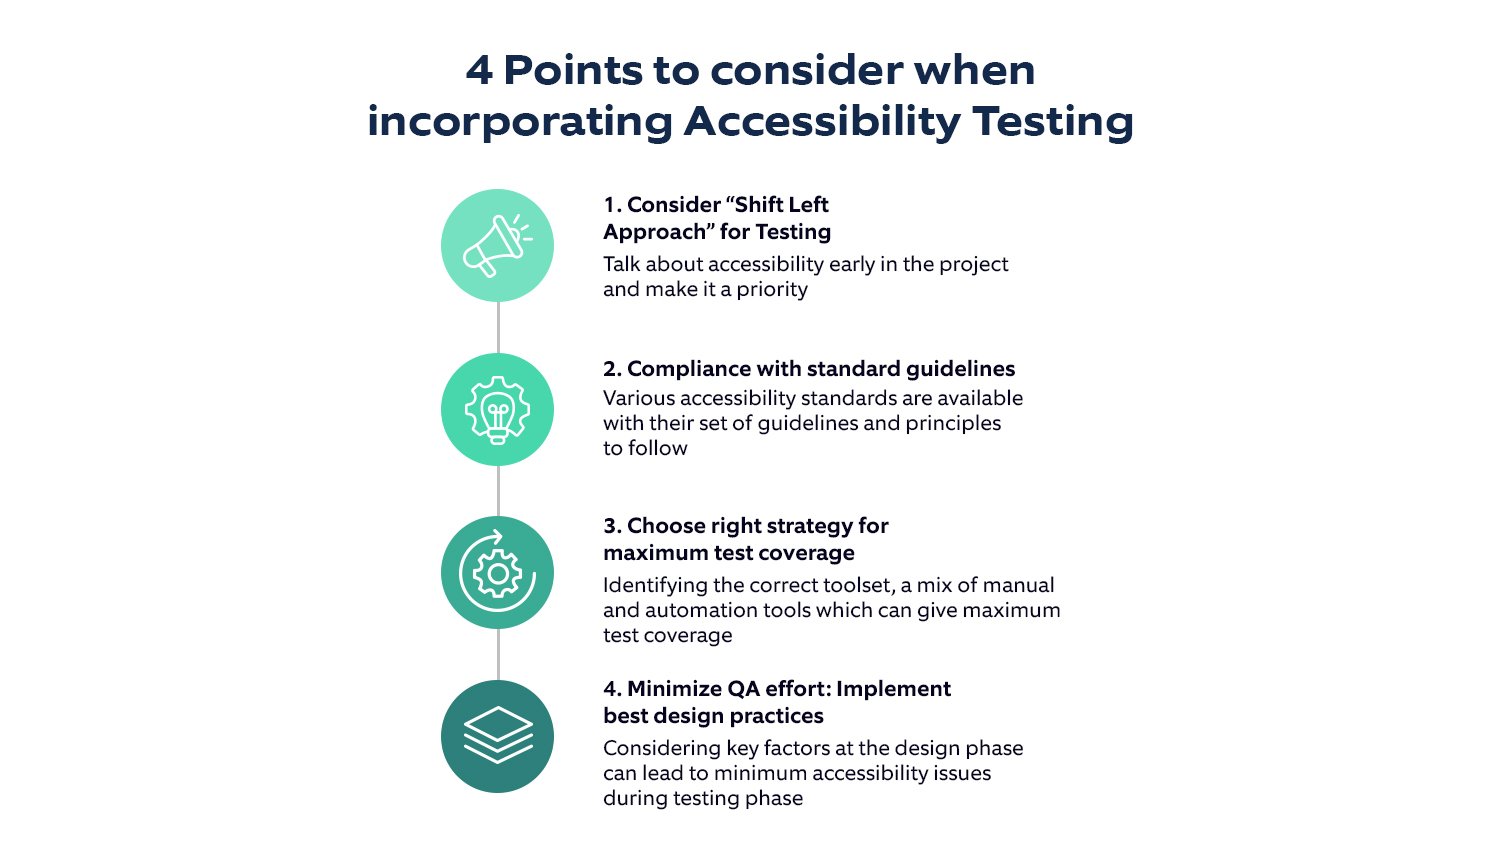  4 things to consider when incorporating accessibility testing